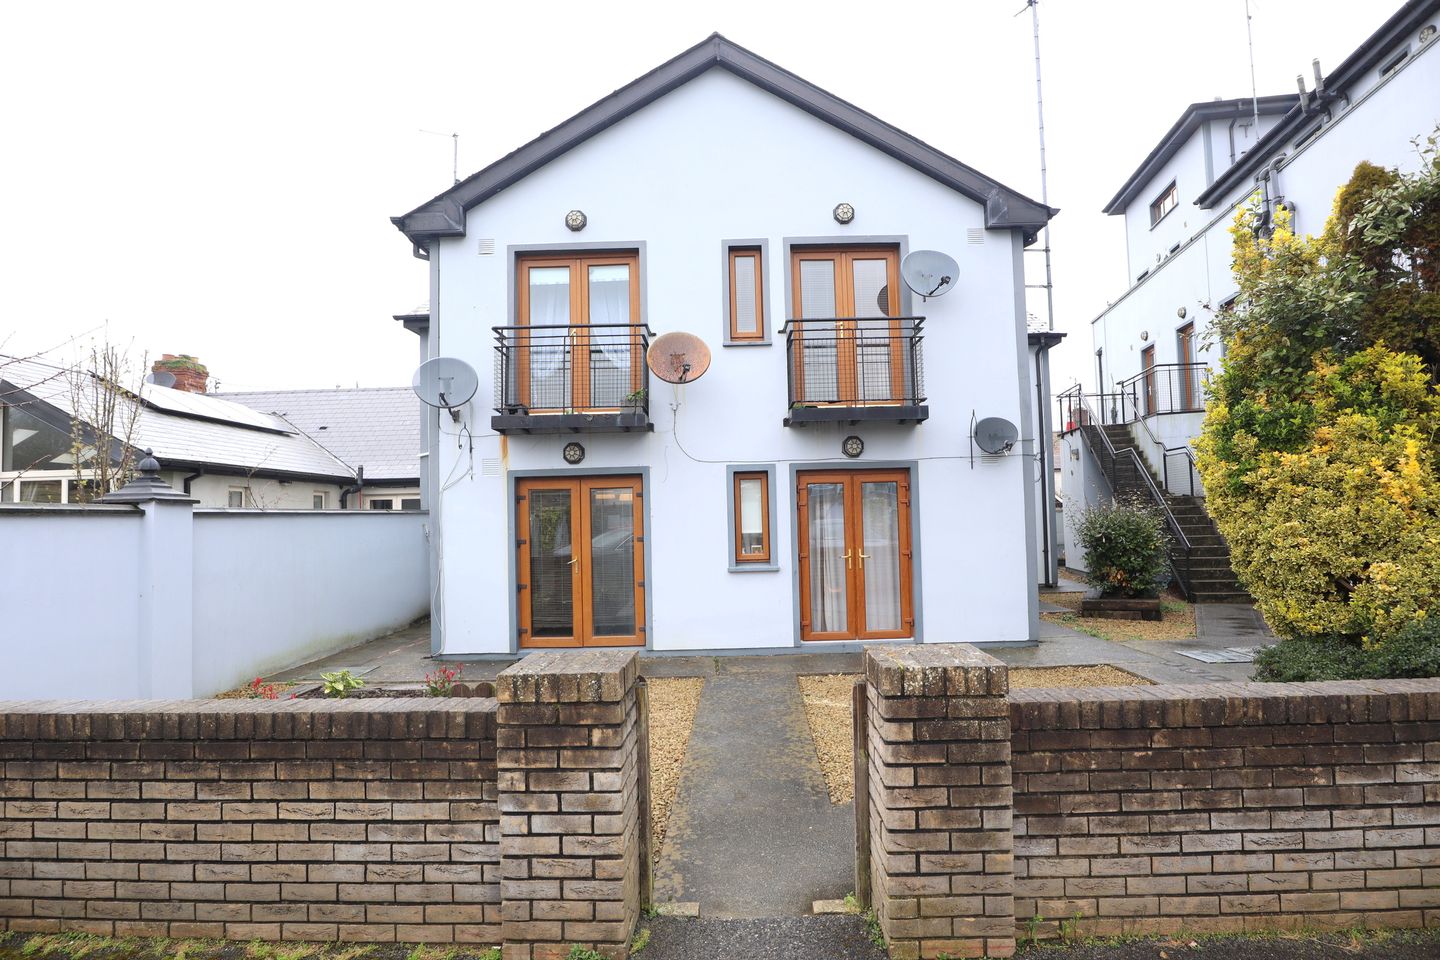 2 Coolagh Well, Beamore Road, Drogheda, Co. Louth, A92F789